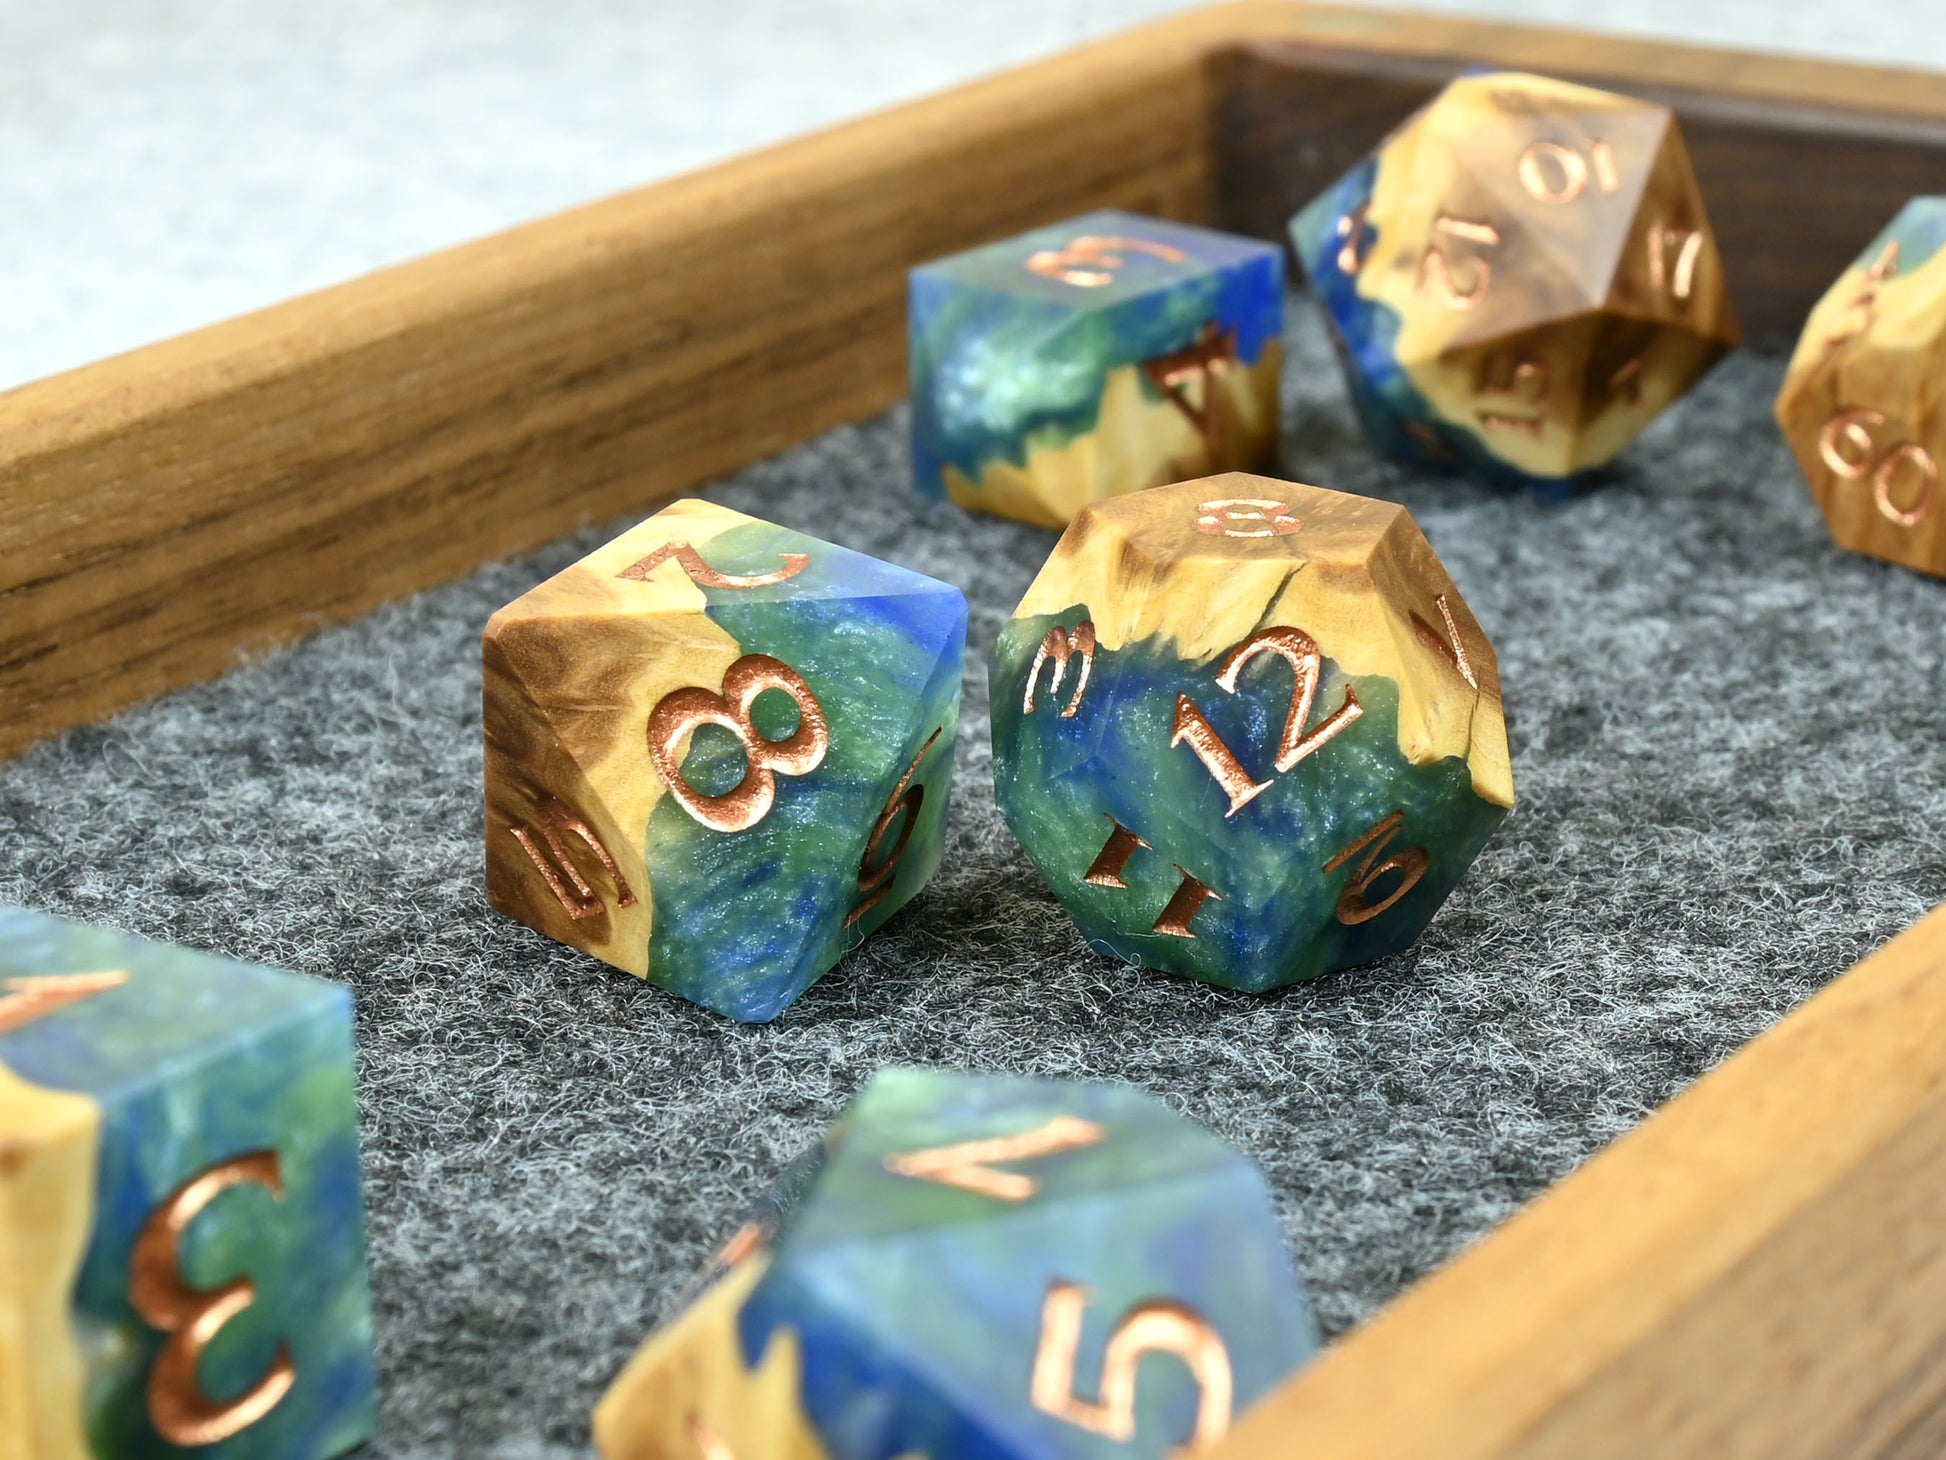 Earth magic brown mallee burl wood and resin hybrid dice set for D&D ttrpg.